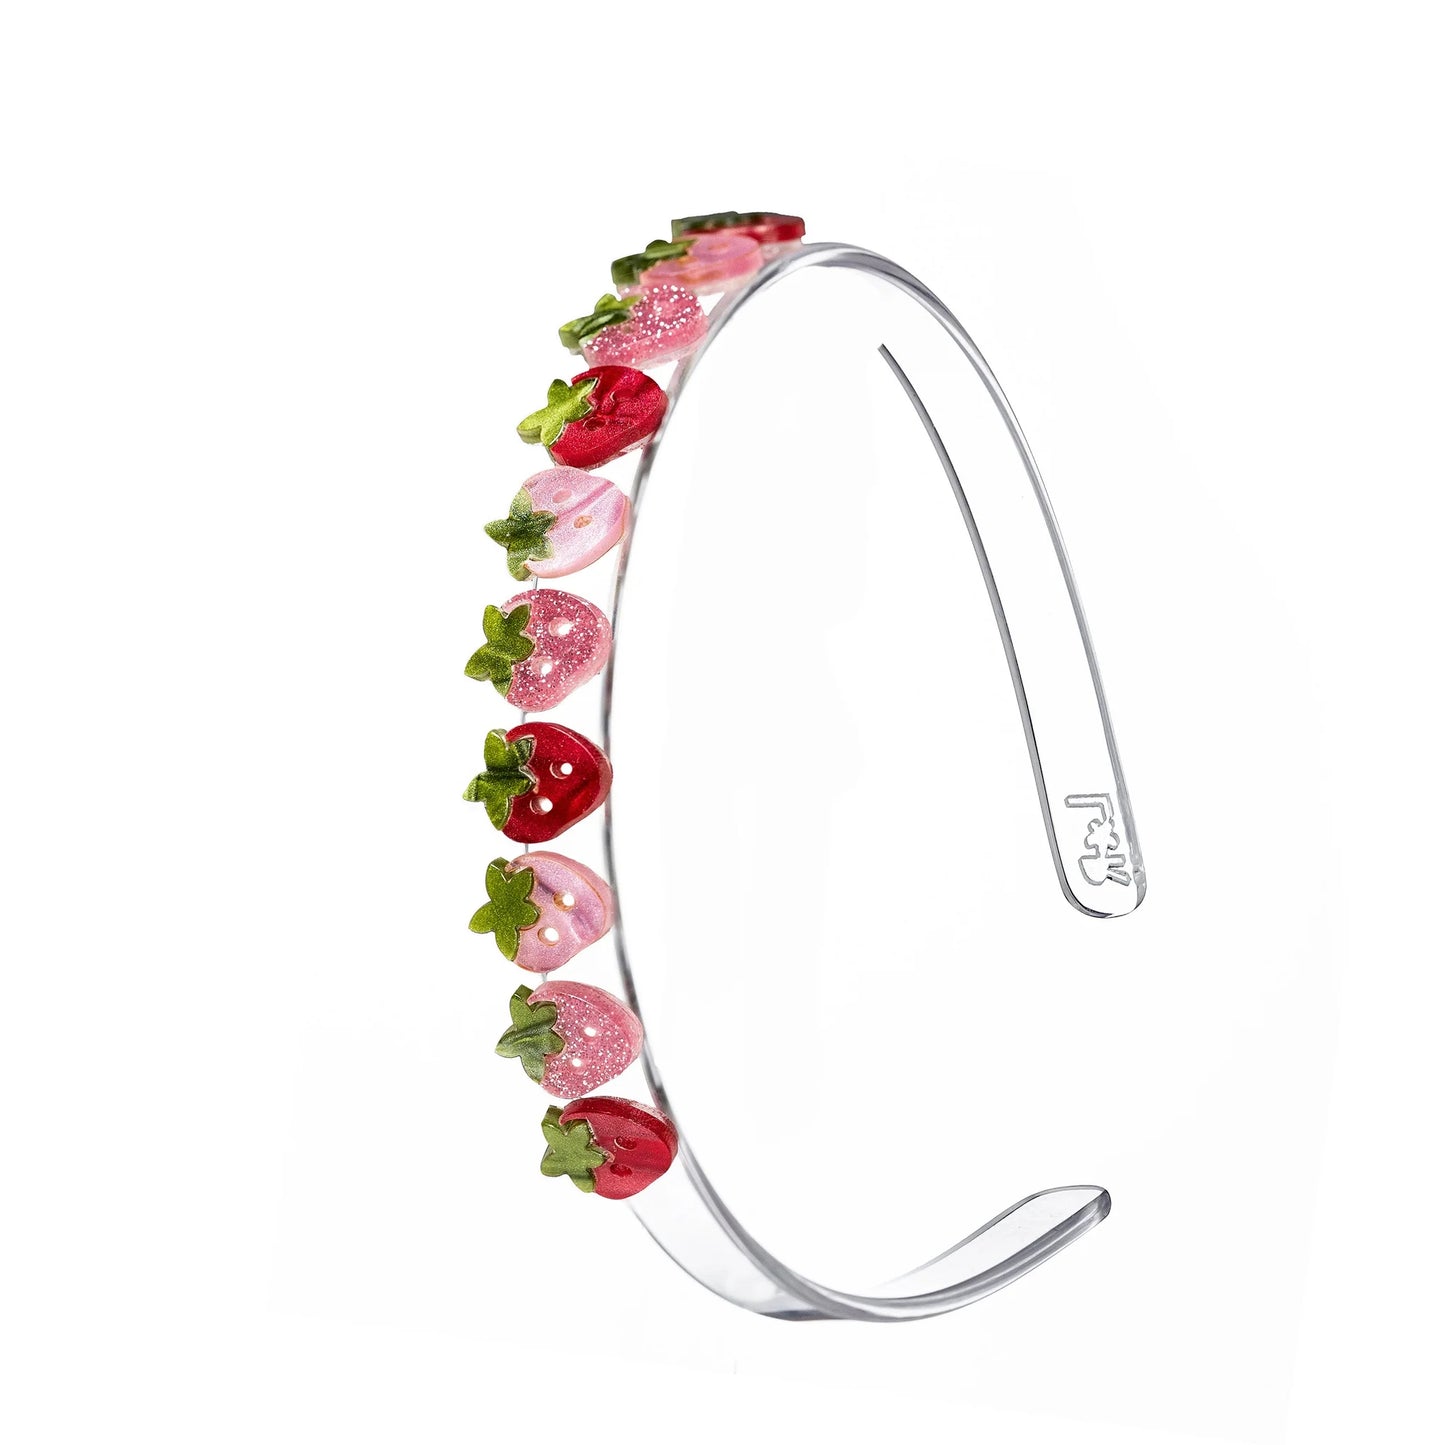 Strawberry Pearlized Headband - Lilies and Roses